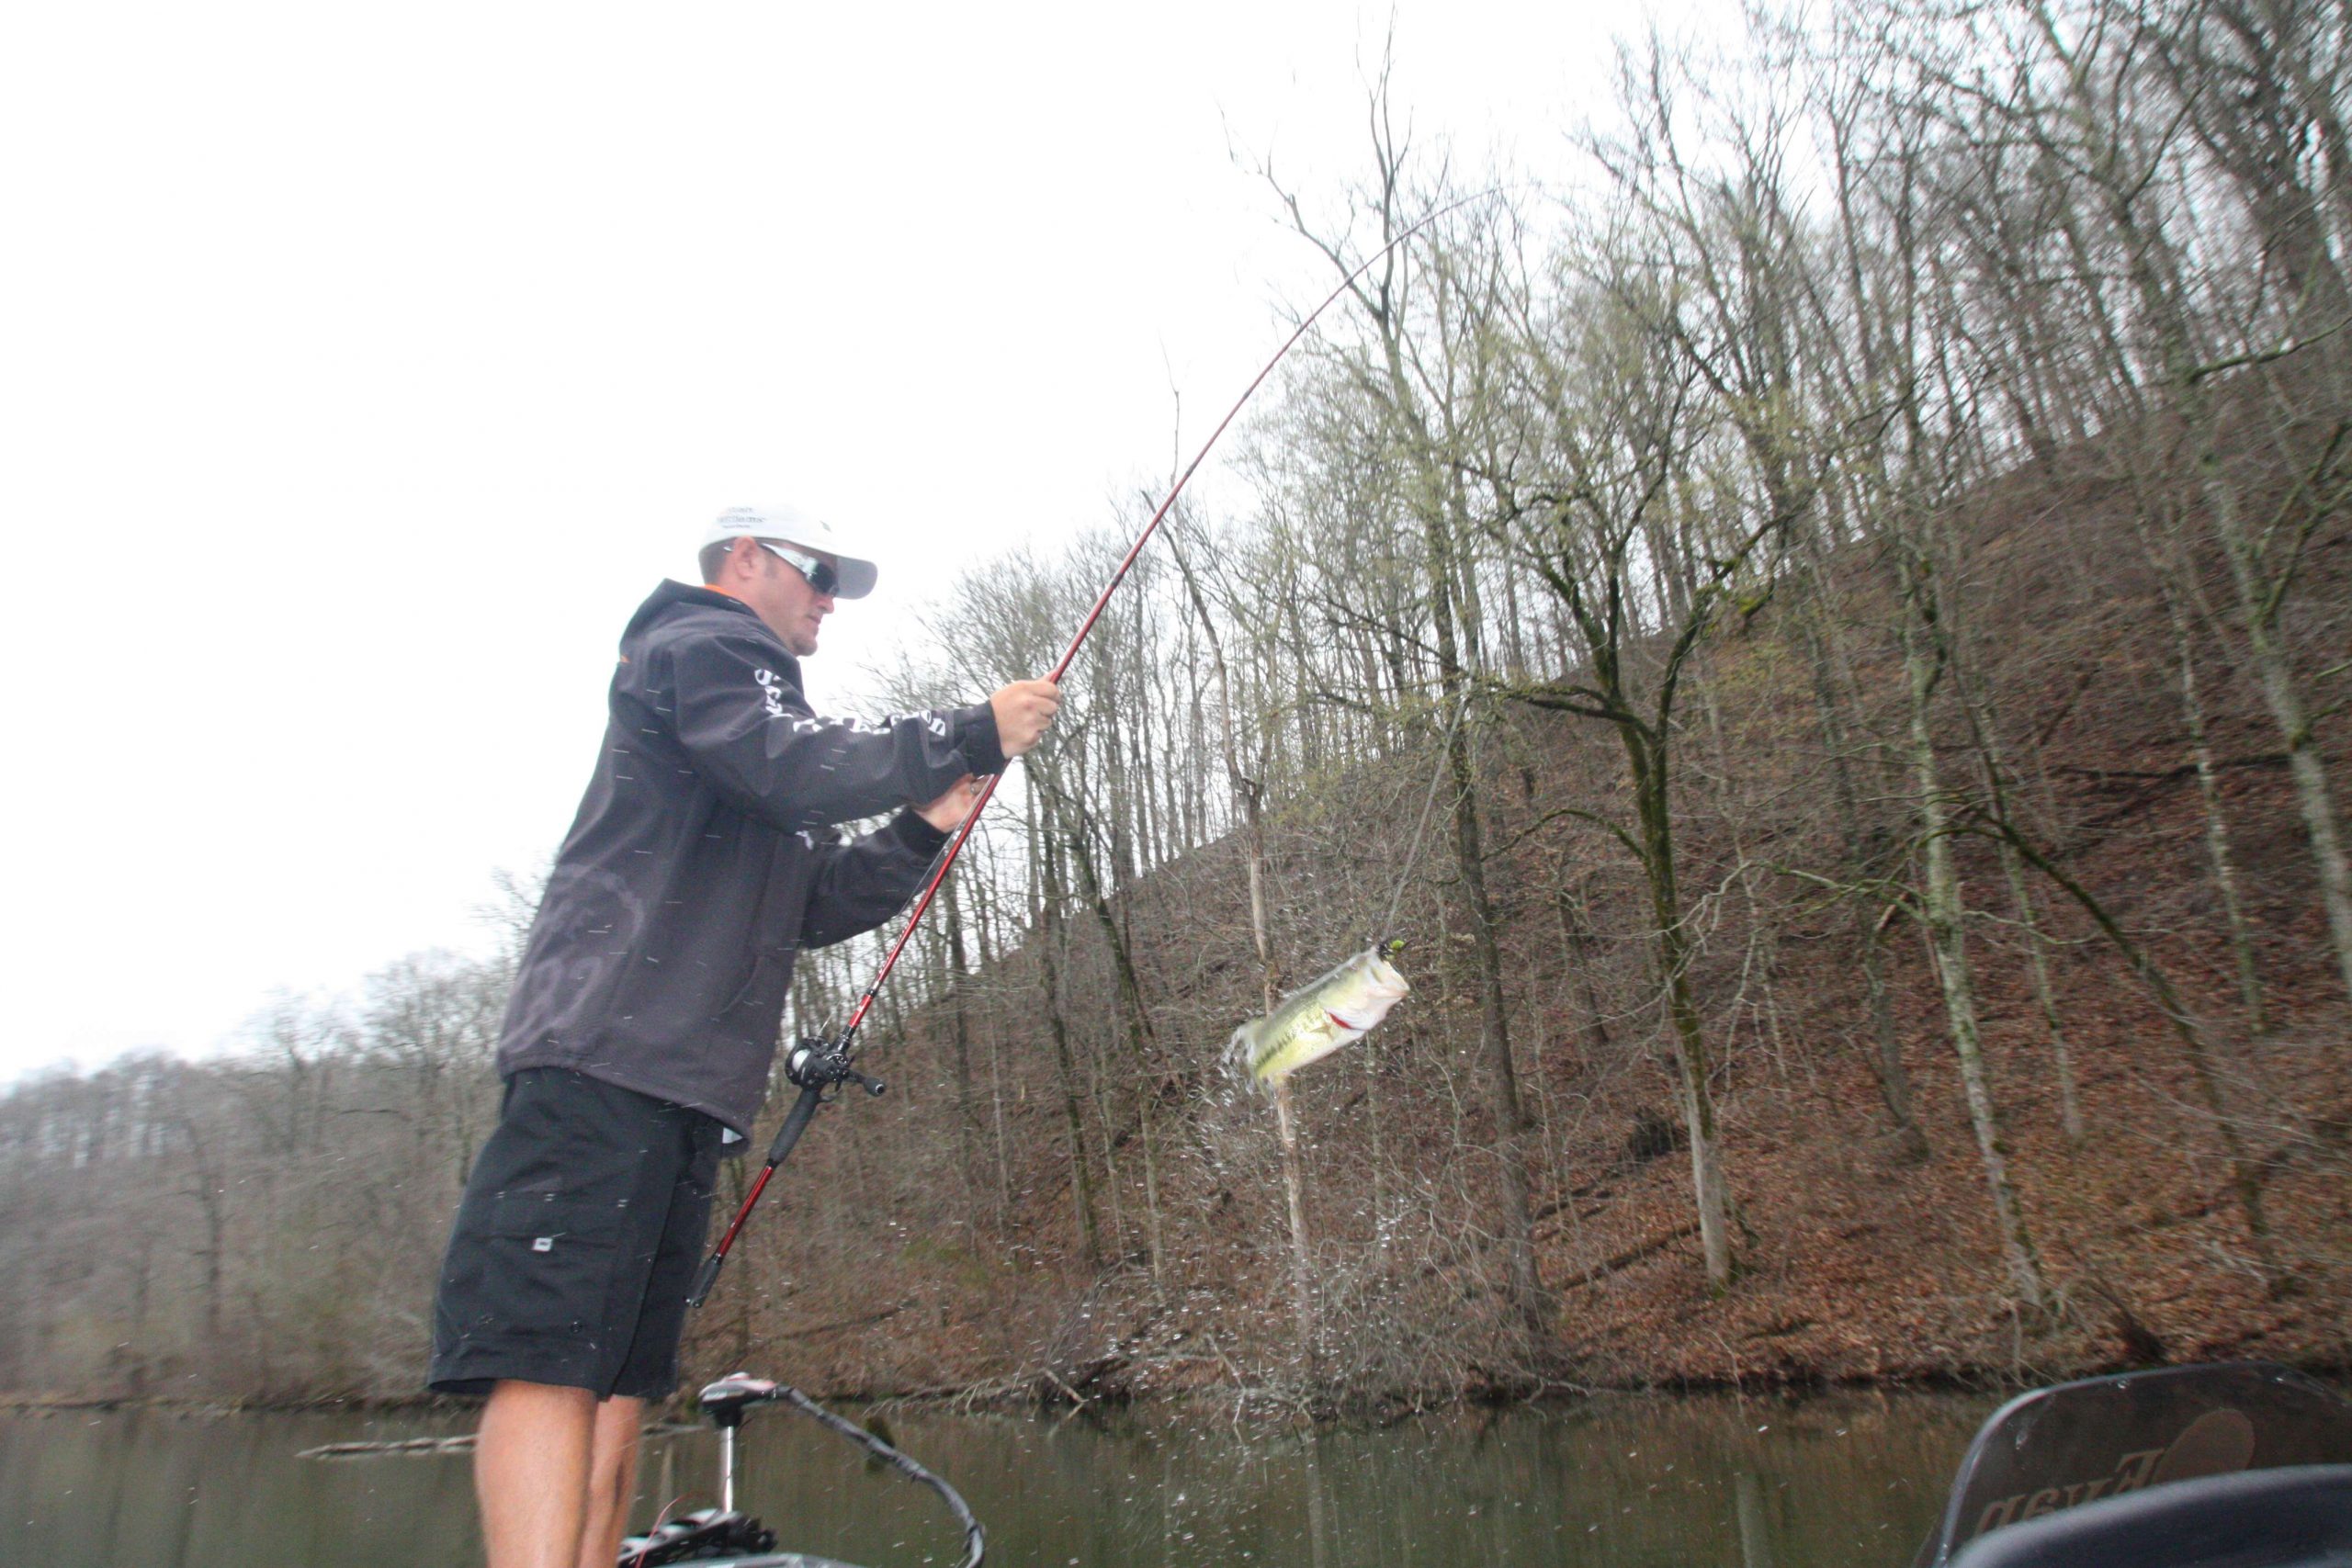 12:20 p.m. Cherry launches a good fish that hit his jig into the boat.